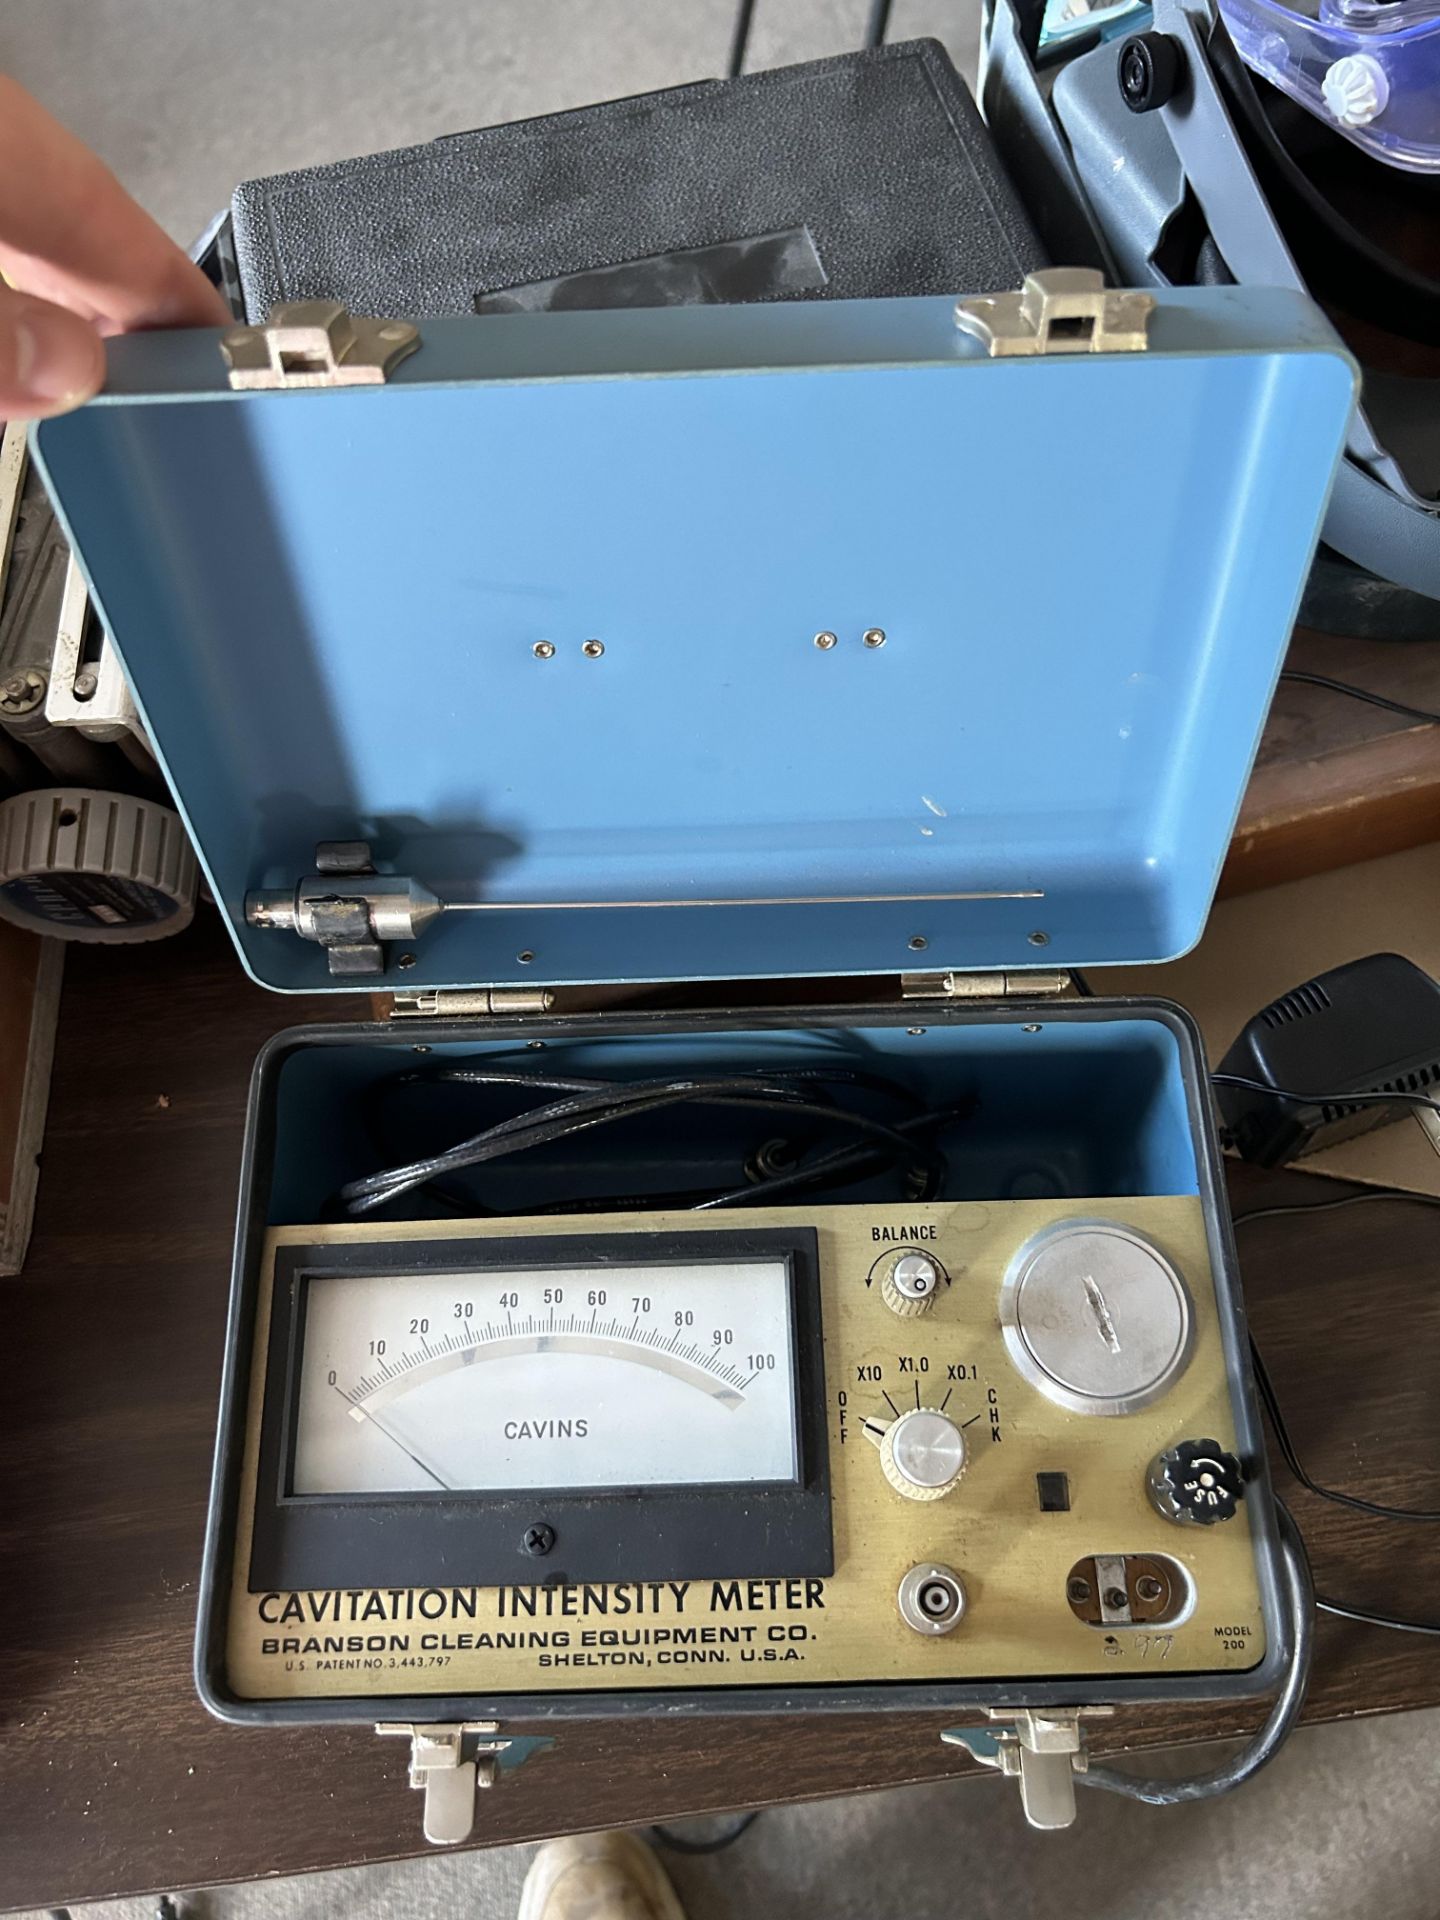 Entire Table of Calibration Type Equipment - Image 10 of 16